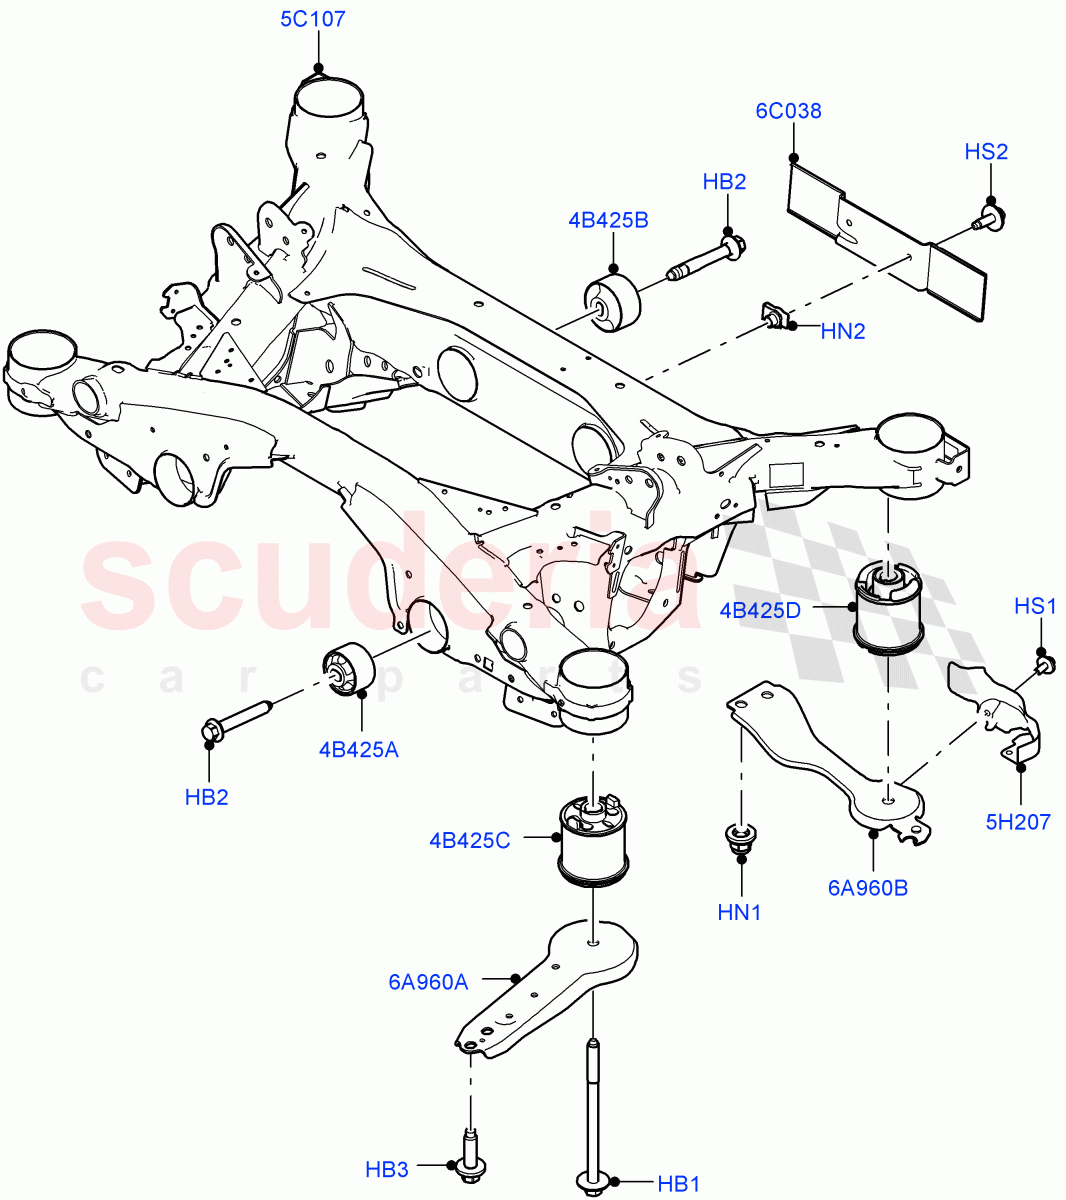 Rear Cross Member & Stabilizer Bar(Crossmember)(Changsu (China),Electric Engine Battery-PHEV)((V)FROMMG575835) of Land Rover Land Rover Range Rover Evoque (2019+) [2.0 Turbo Diesel]